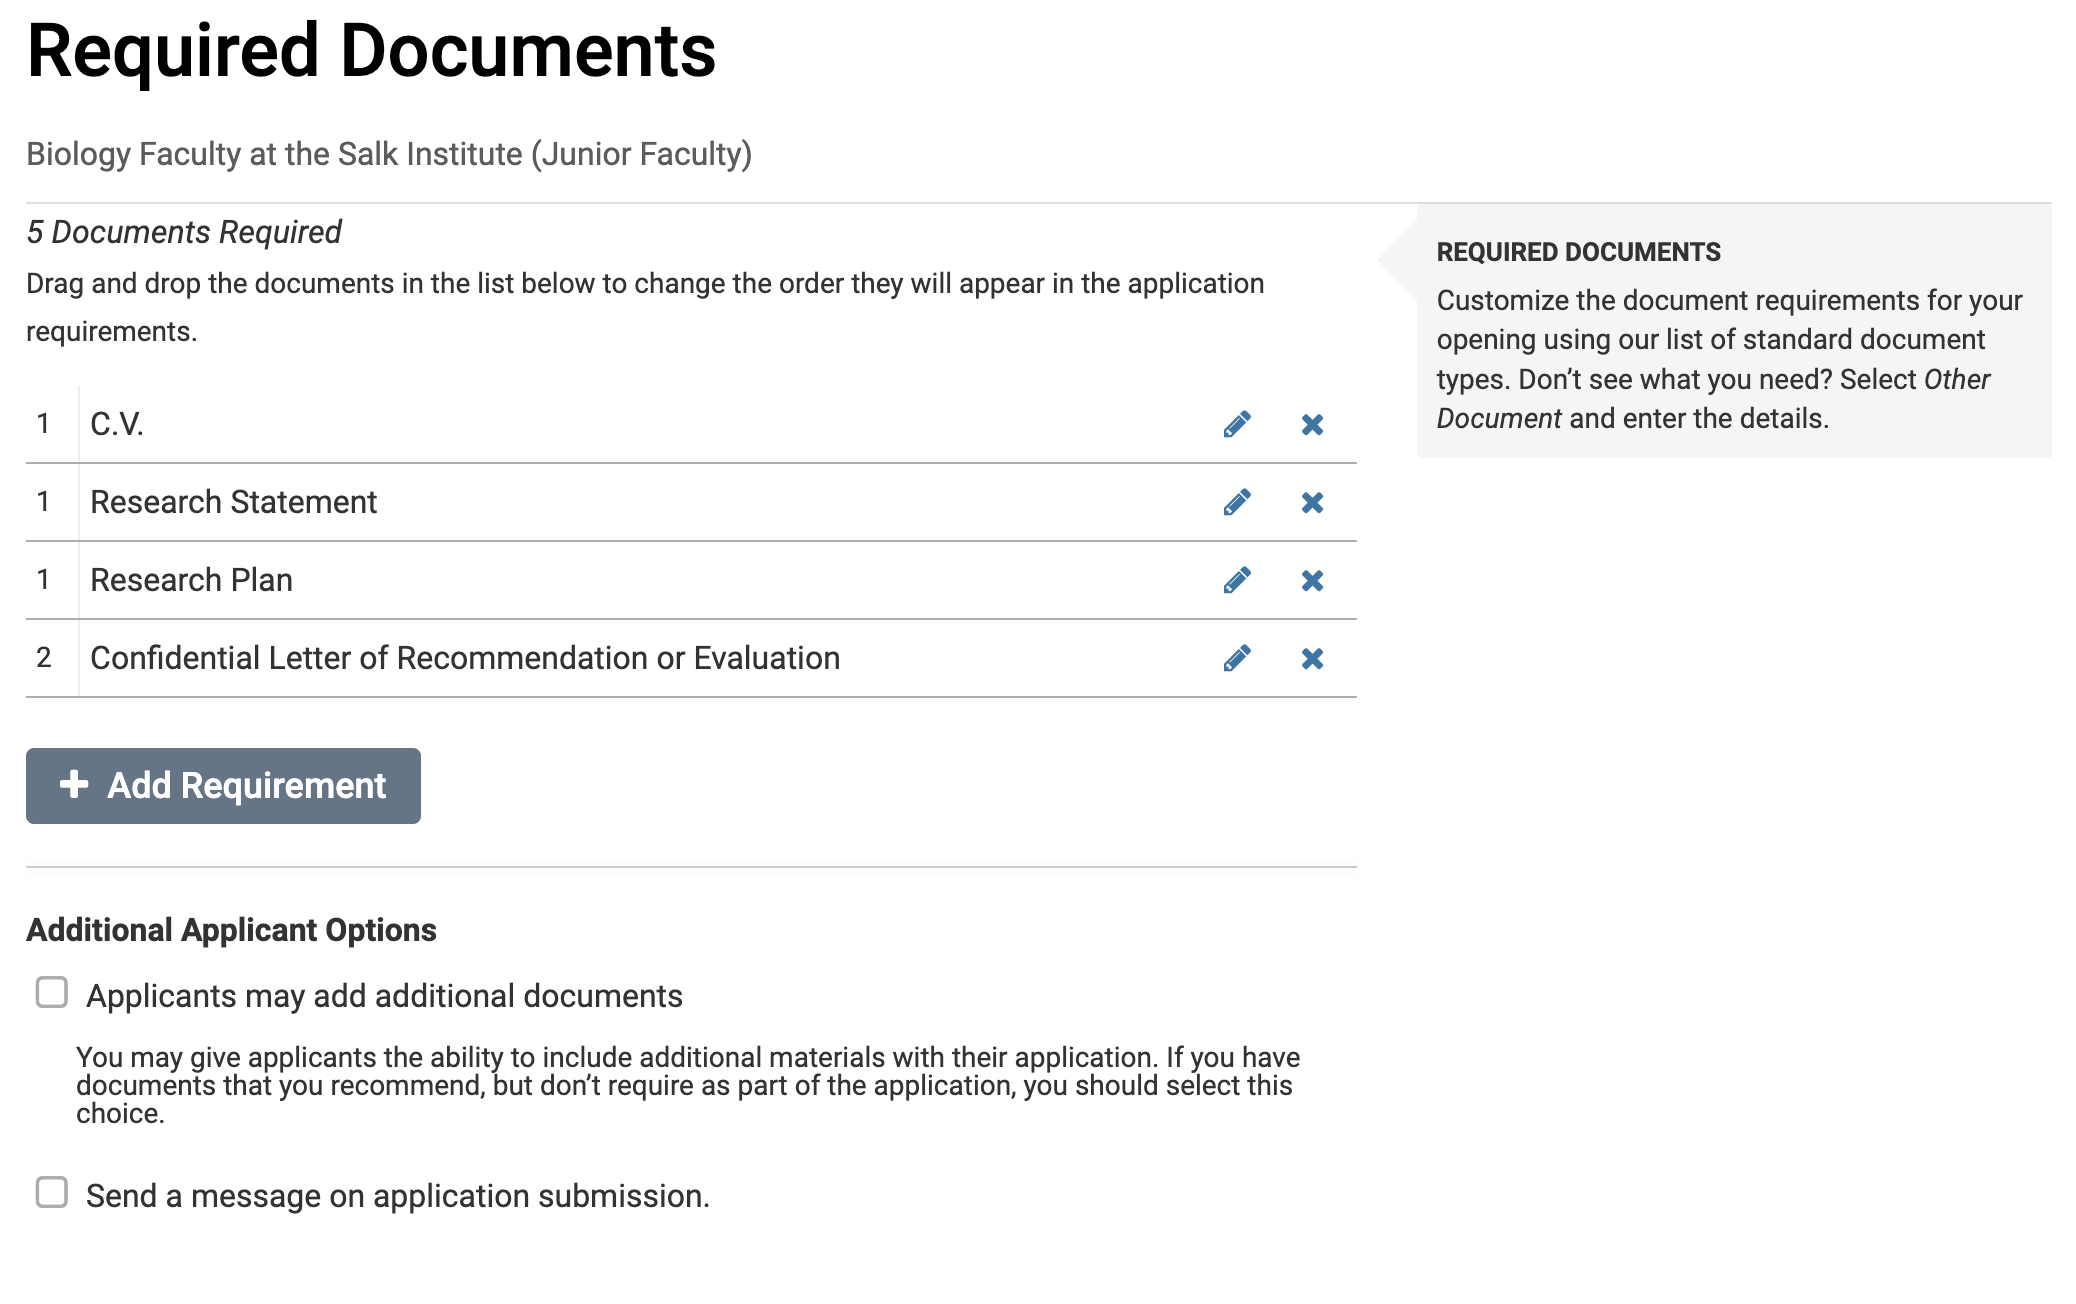 Required Documents section with Add Requirement button below